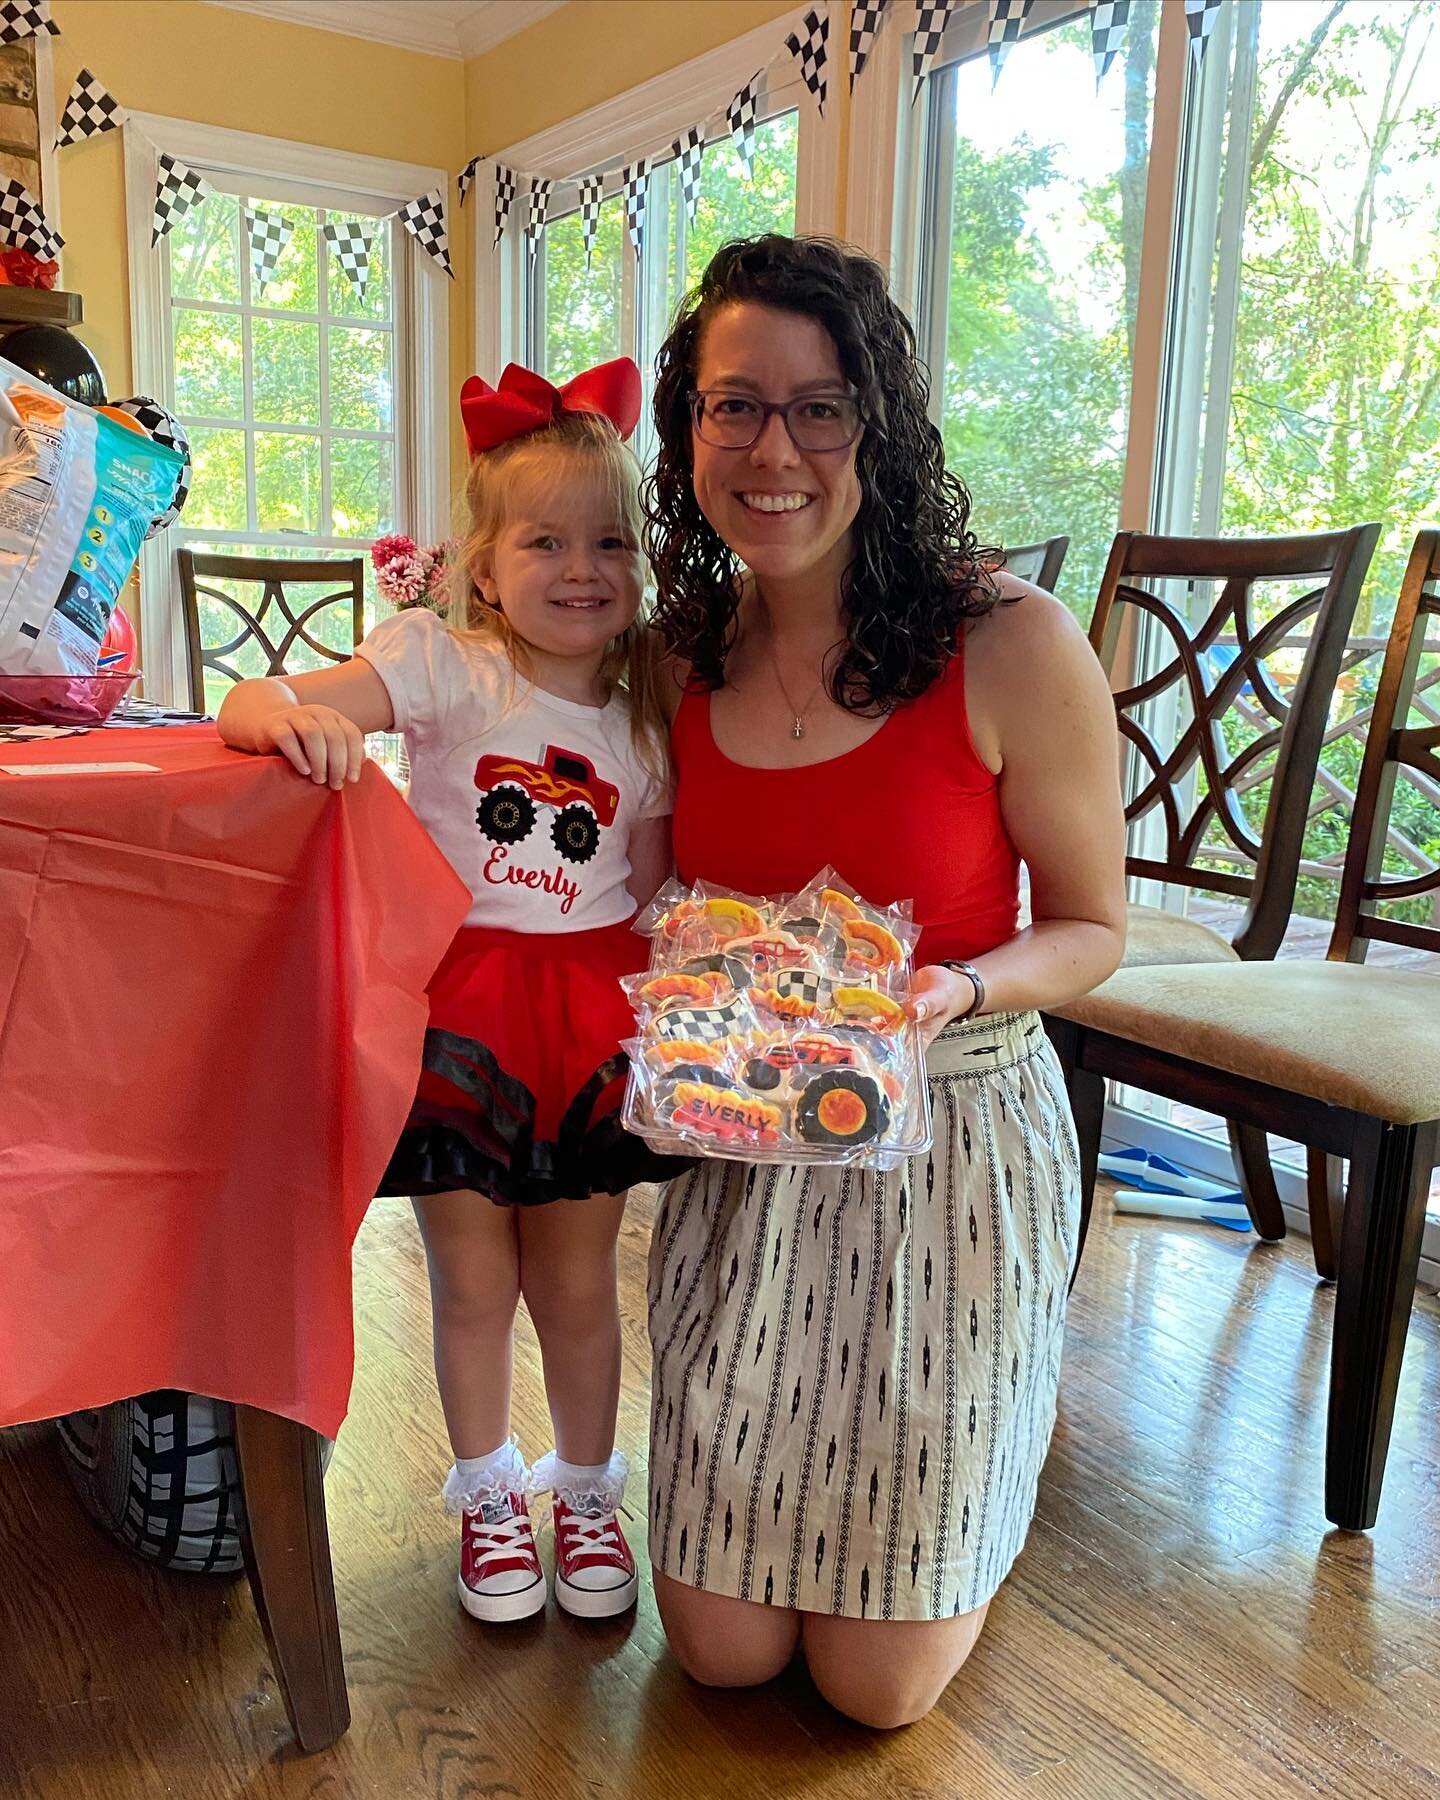 The past three years have Blazed by! I can&rsquo;t believe my sweet niece is 3! 

I&rsquo;m so glad I be there to celebrate her birthday and could turn her cookiefy her theme - Blaze and the Monster Machines.